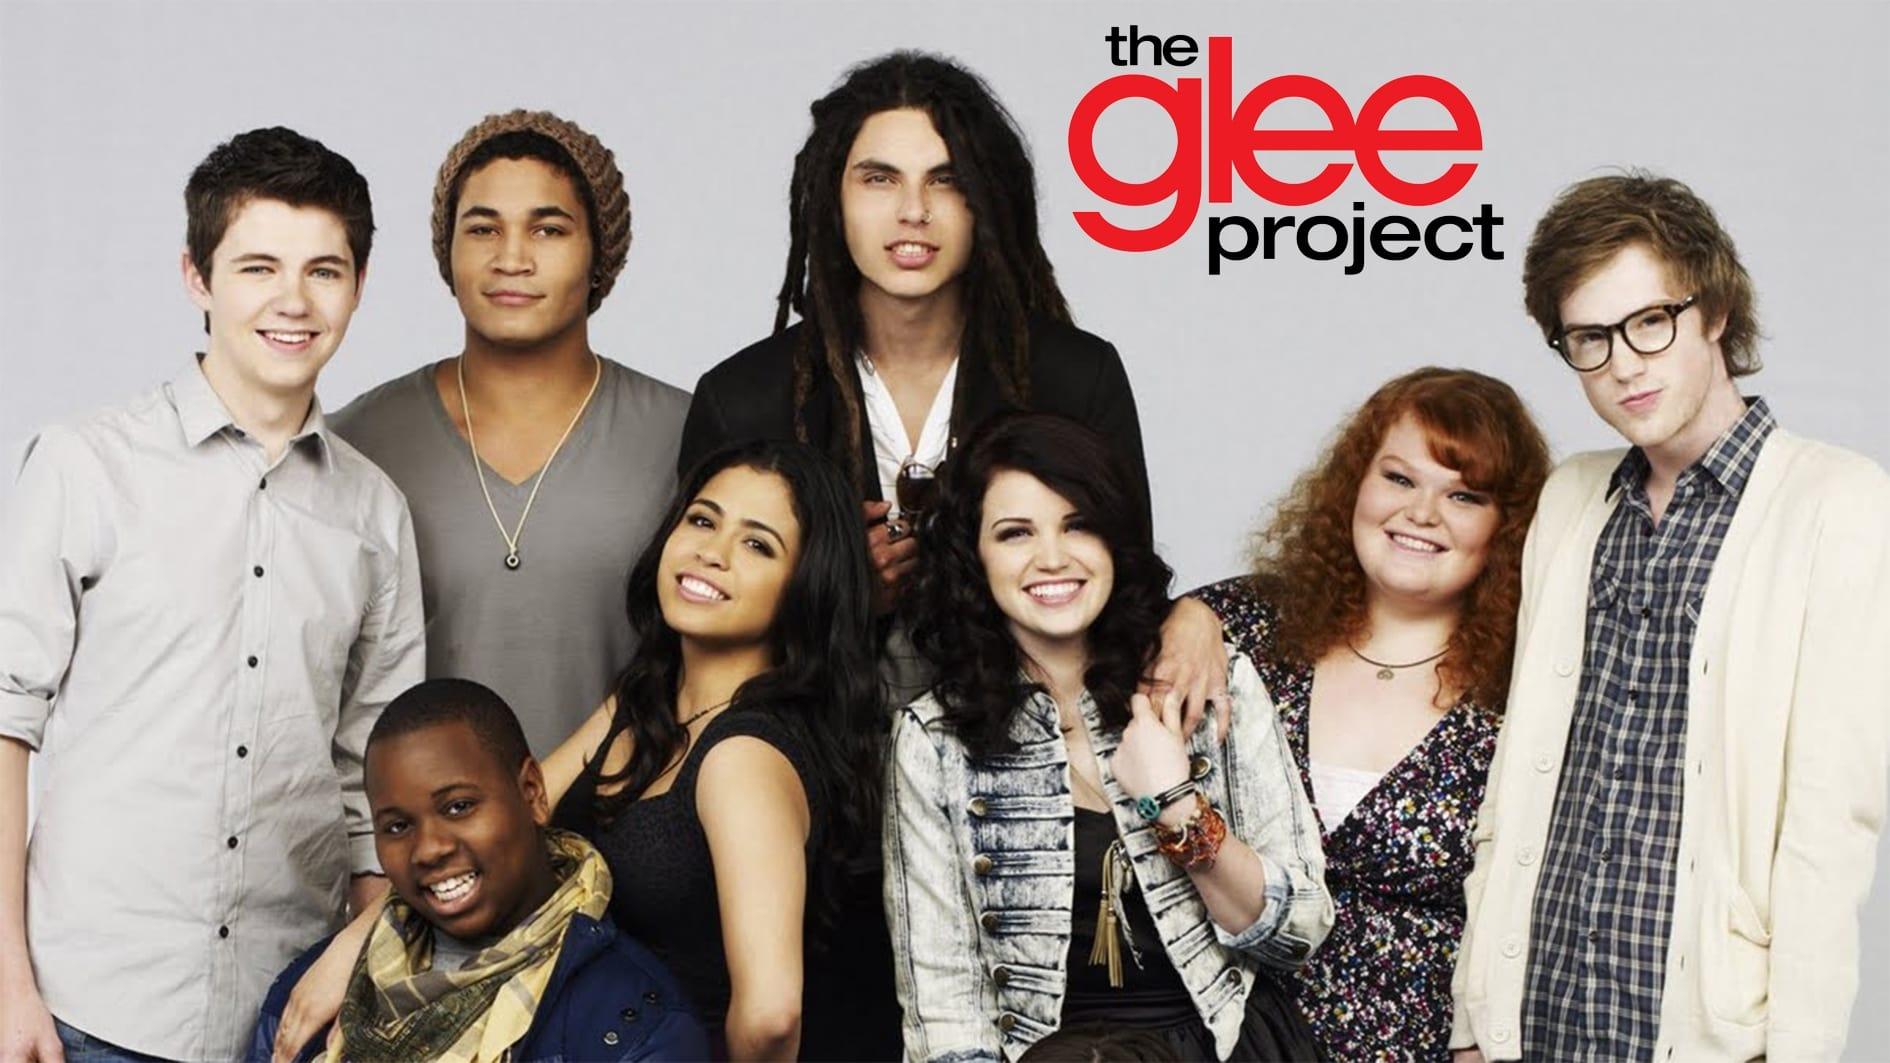 The Glee Project backdrop